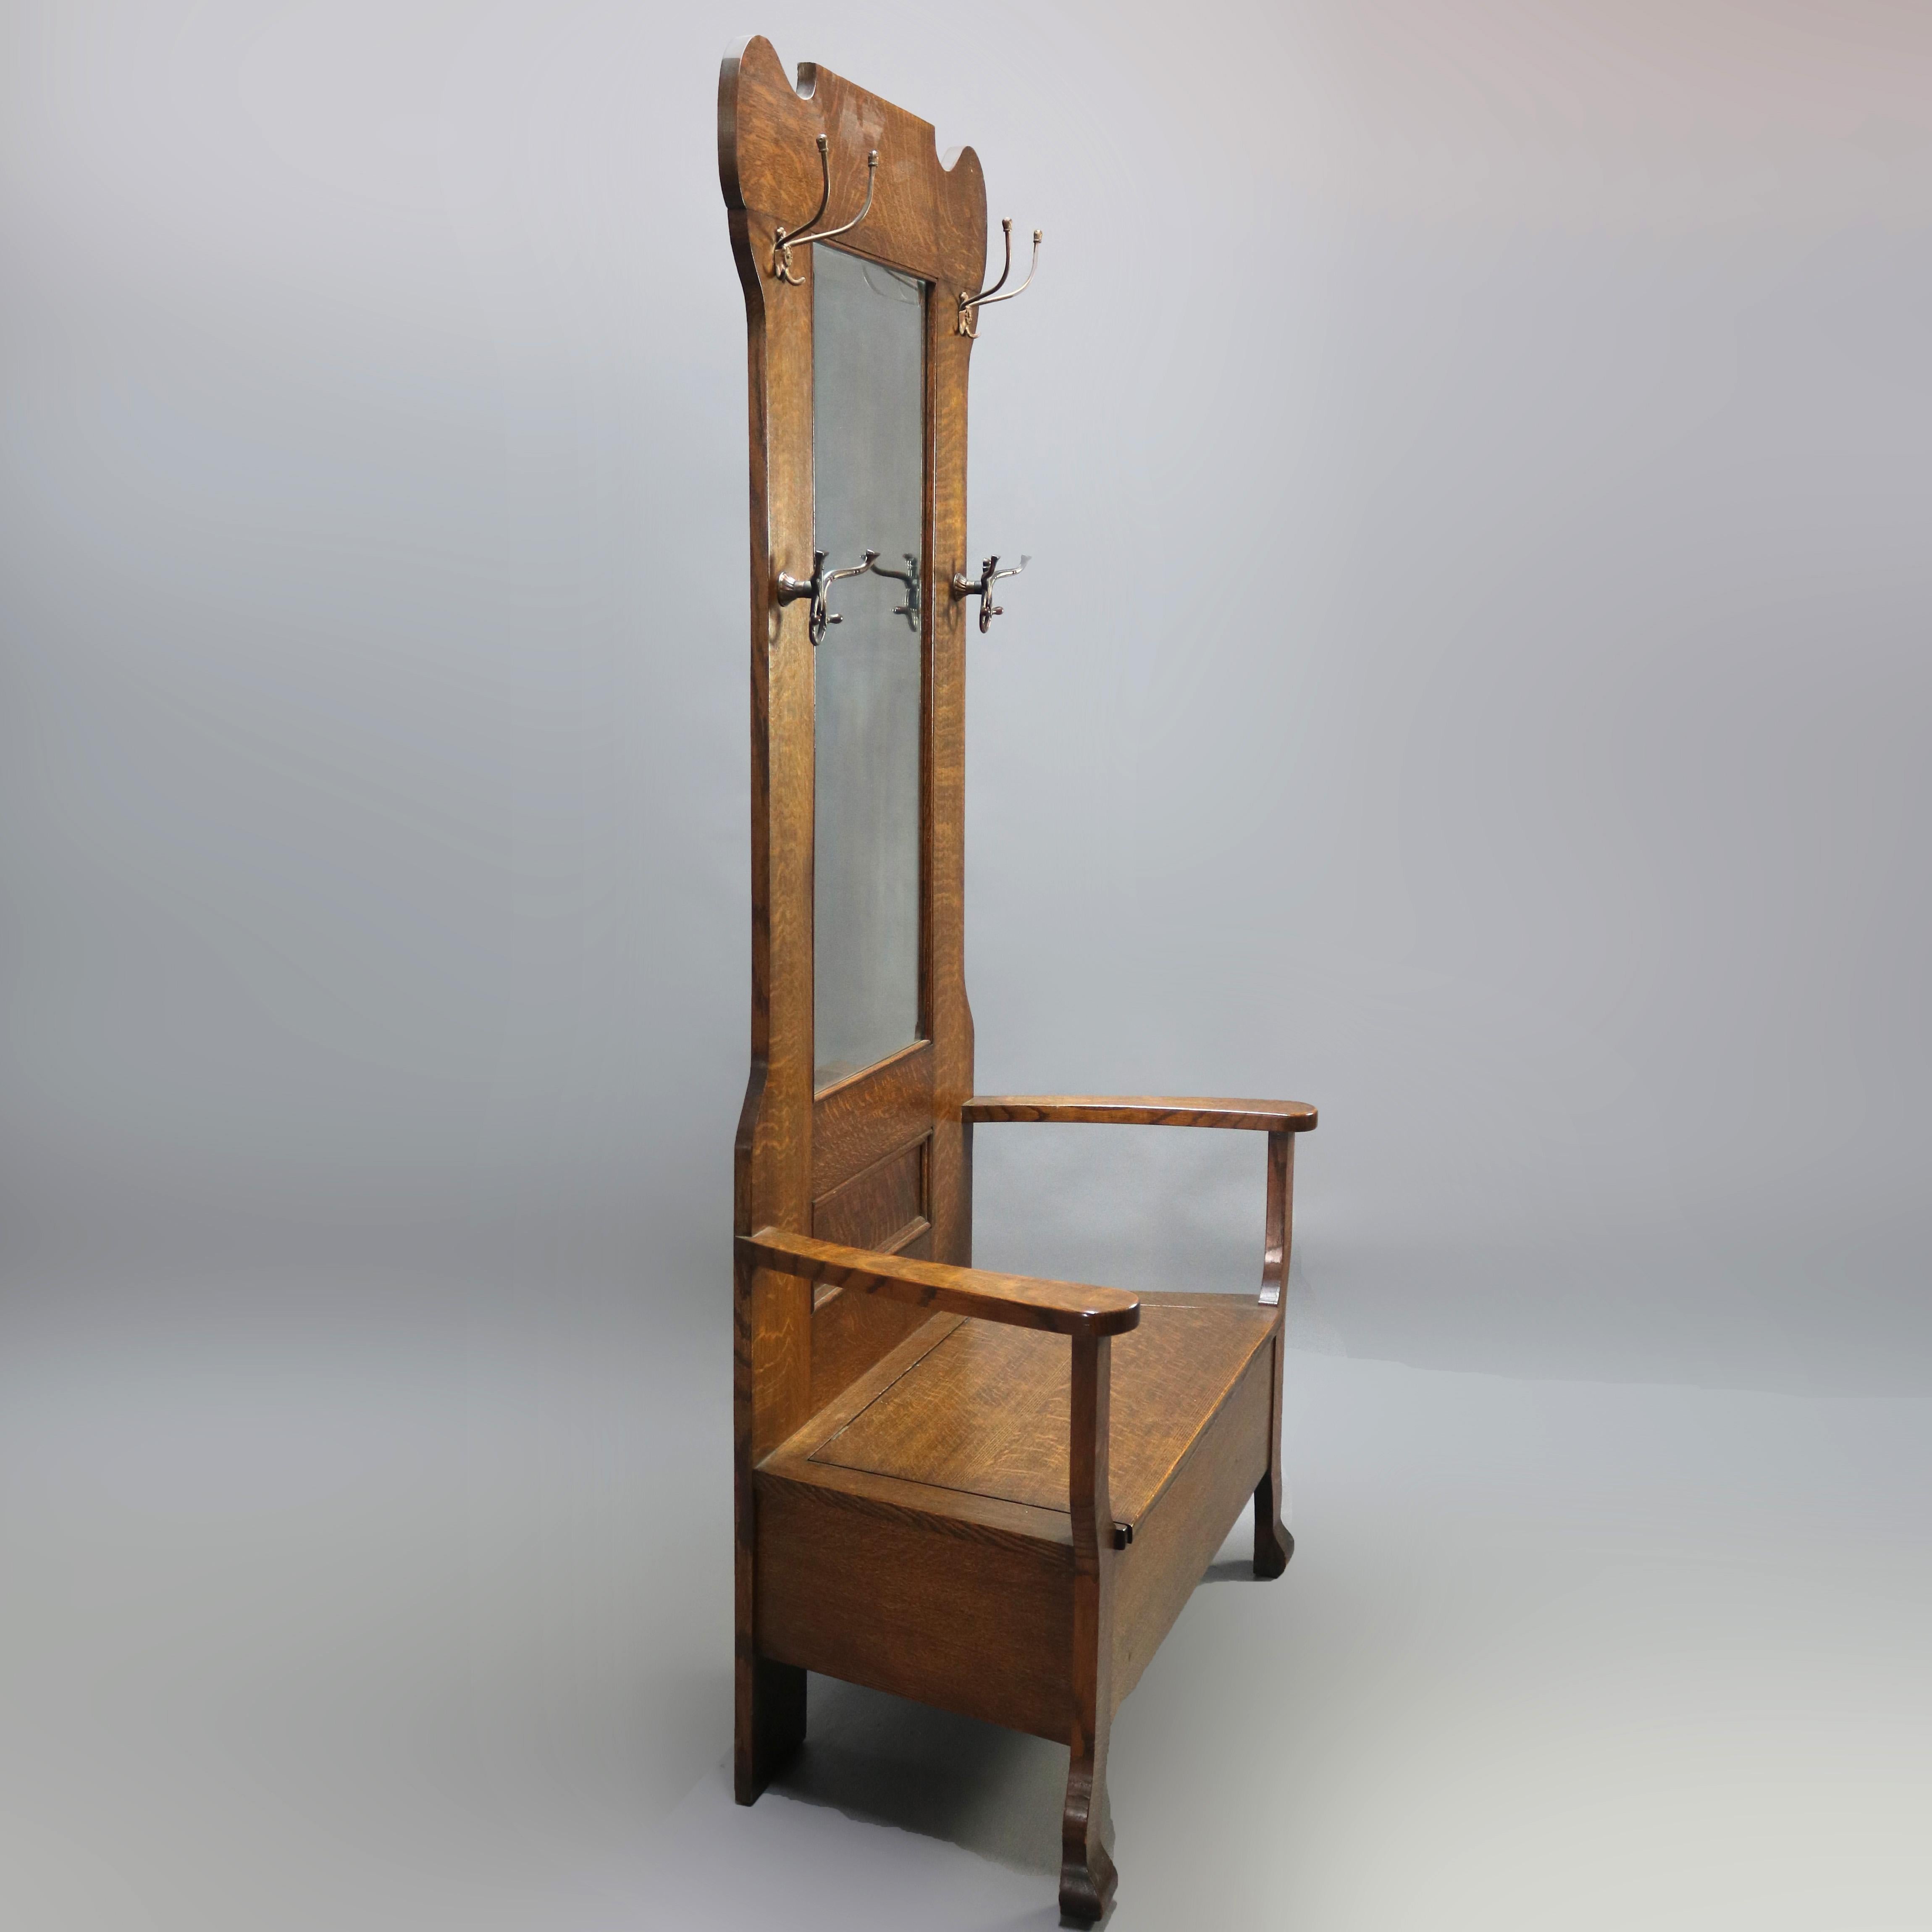 An antique Arts & Crafts Mission oak hall seat offers shaped frame with central mirror and flanking coat/hat hooks surmounting lift top seat with level arms, circa 1900.

Measures - 79.5